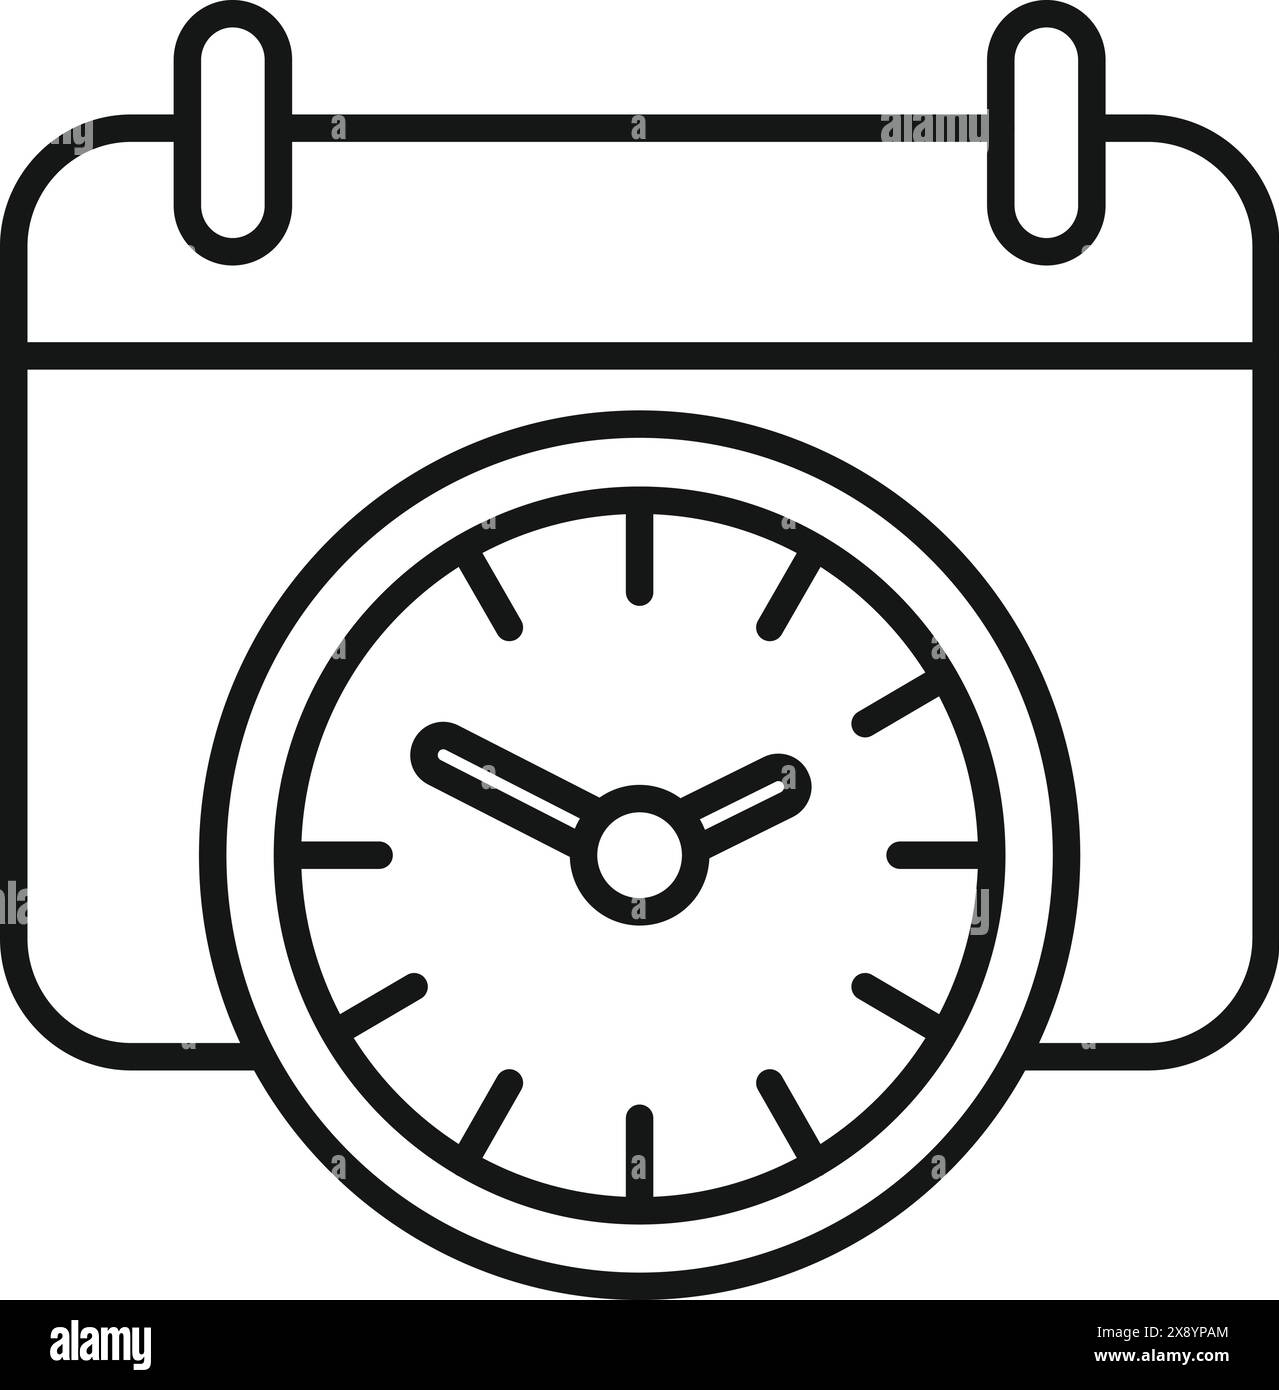 Line art illustration combining a calendar and a clock symbolizing schedule and time management Stock Vector